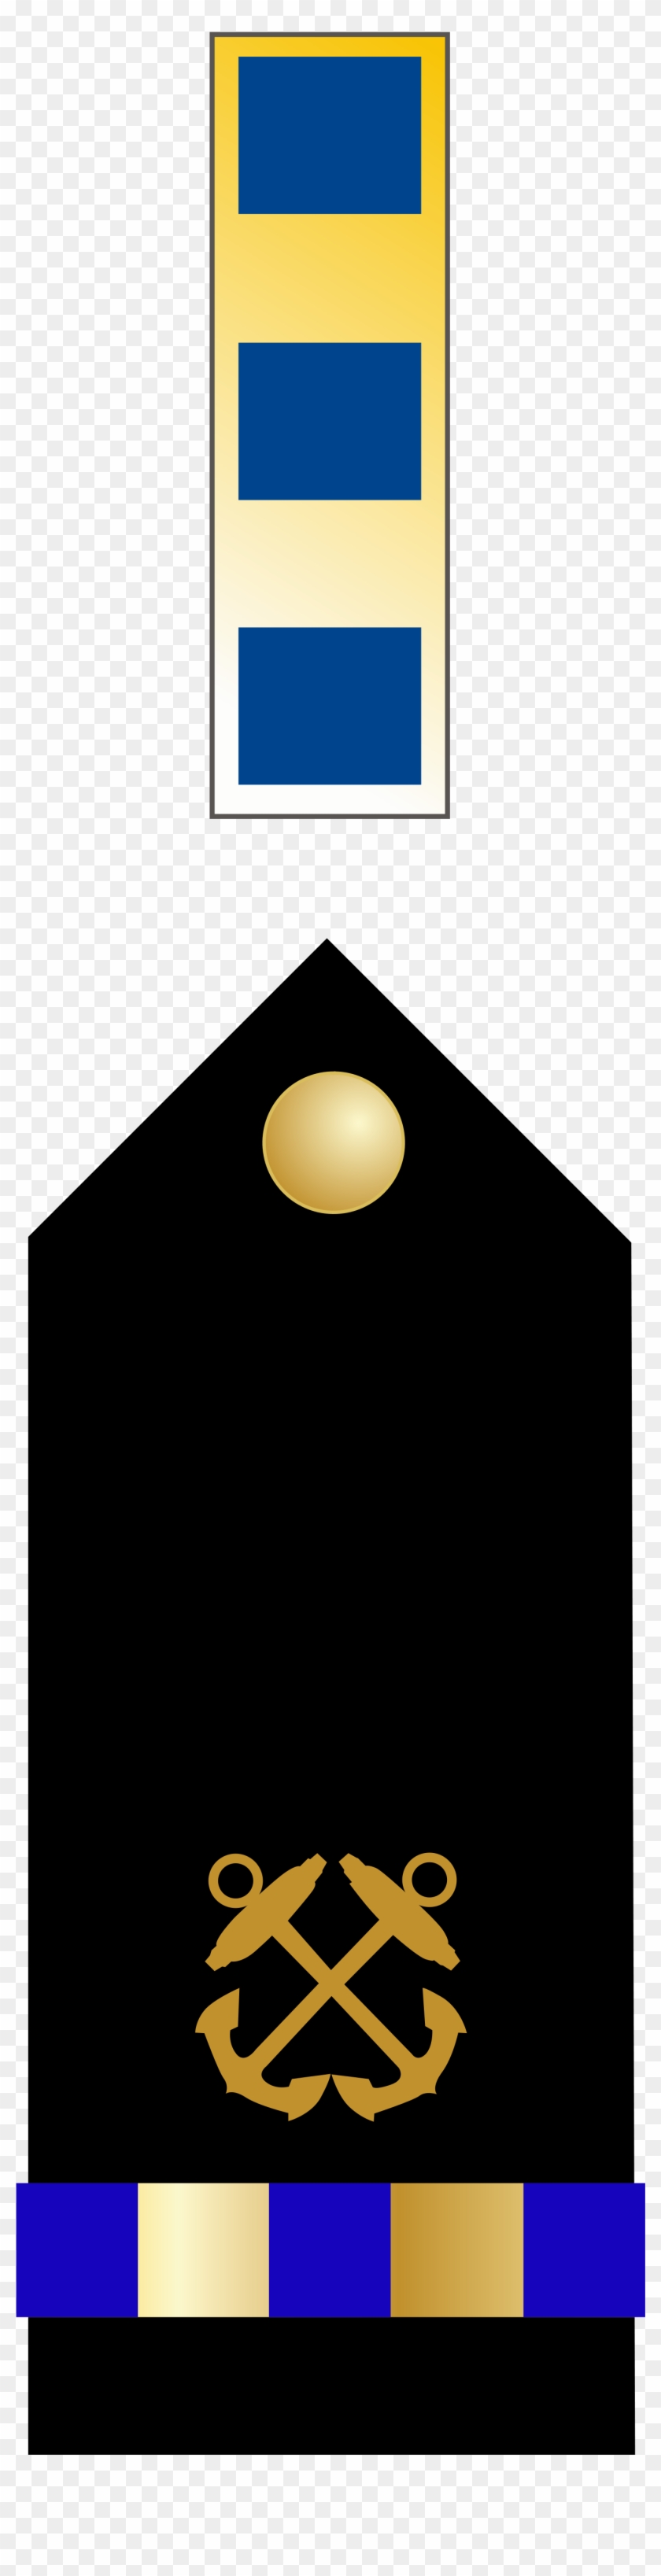 Chief Warrant Officer - Master Chief Petty Officer Insignia #747100